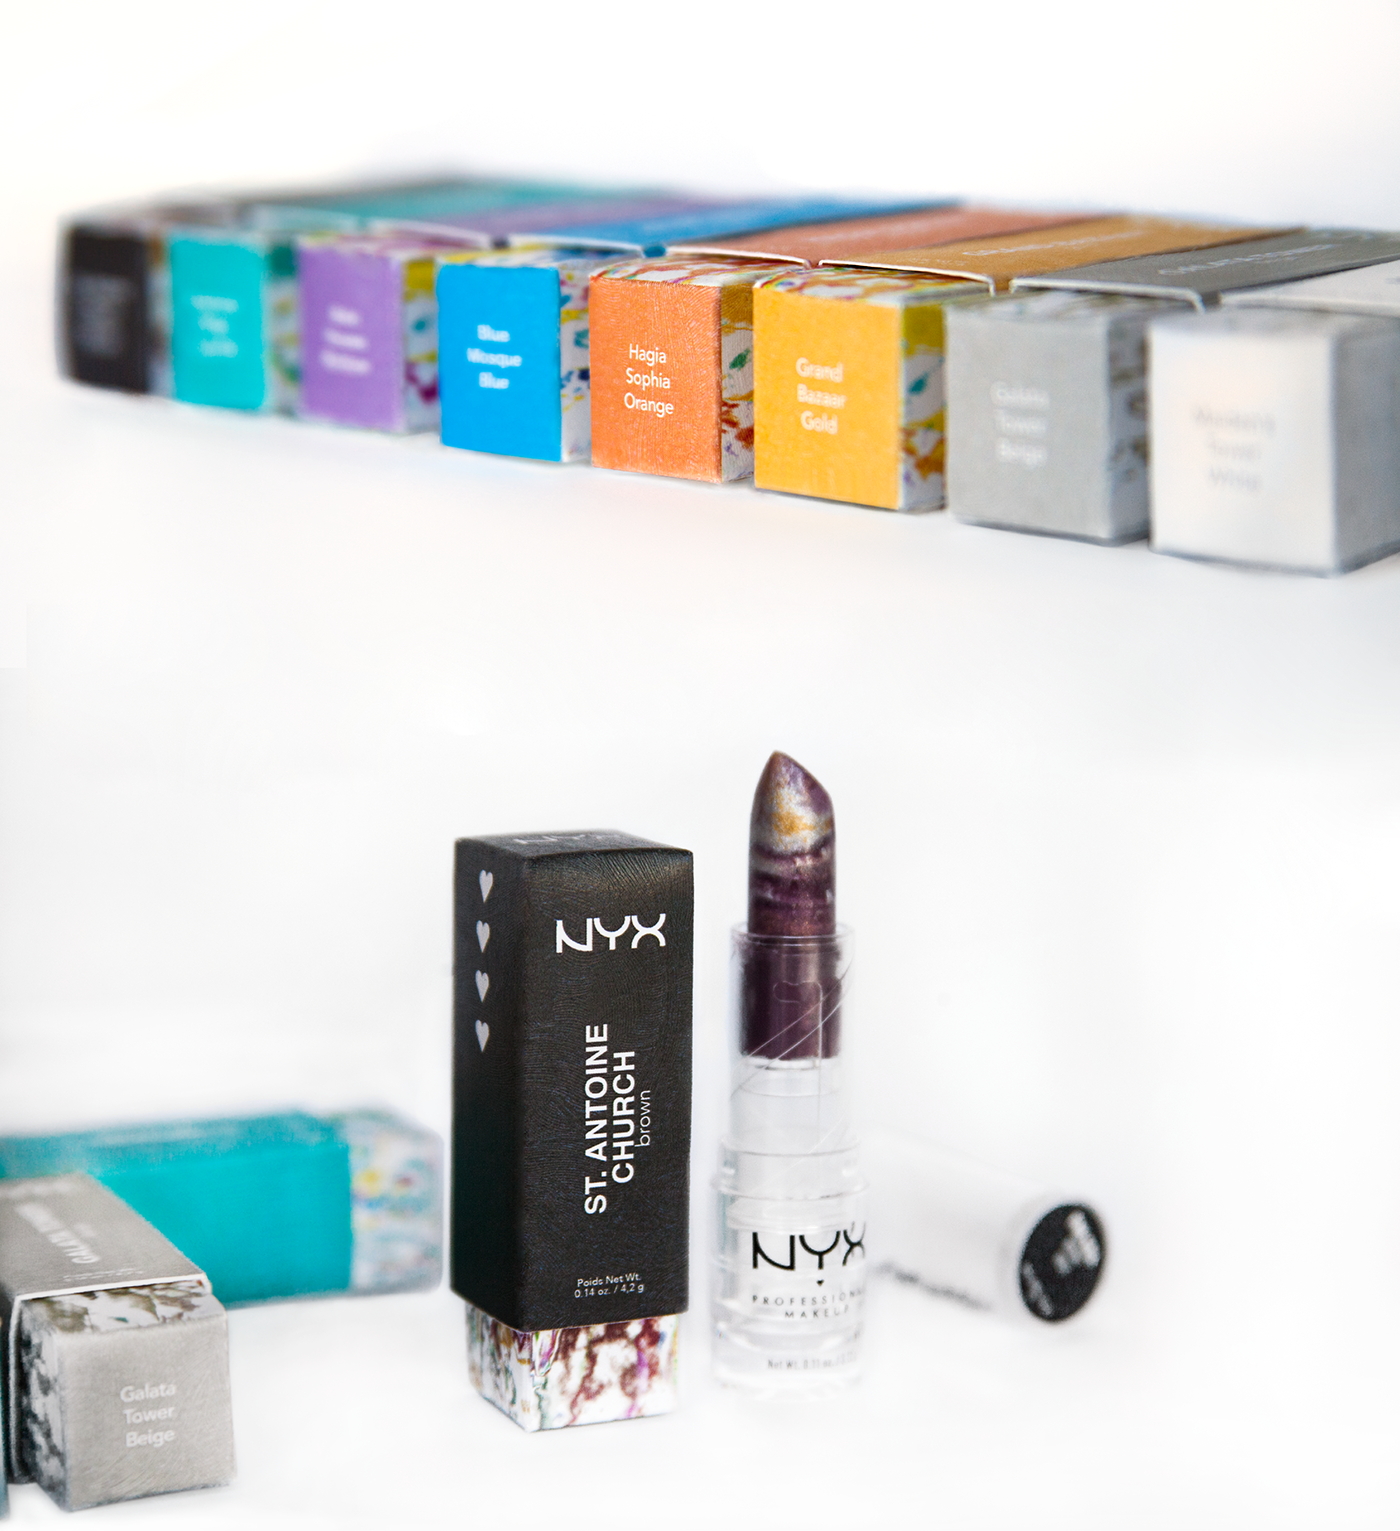 nyx lipstick nyxmakeup Marble lipstickseries Packaging packagindesign texture colorful eyecatchy